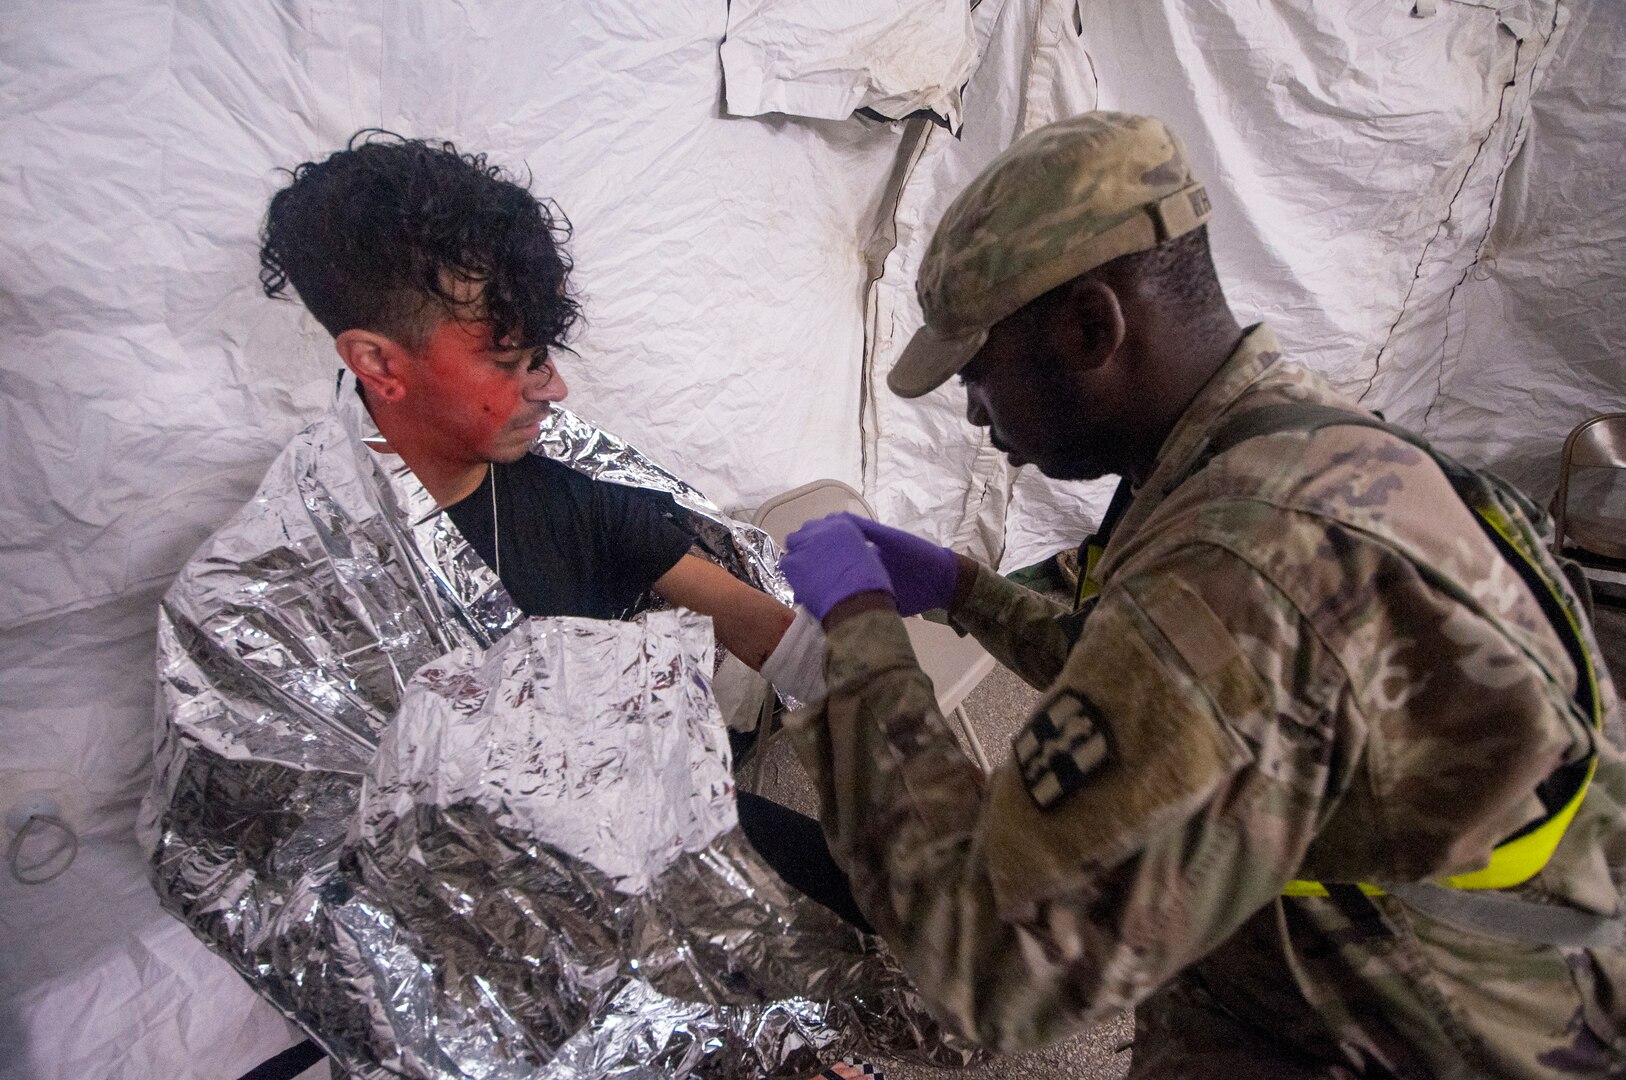 Spc. Corey White, a combat medic with 581st Medical Brigade out of Fort Hood, assesses a role-player’s notional injuries during a field training exercise Aug. 30 at Retama Park in San Antonio. The exercise involved military and San Antonio civilian first responders of the chemical, biological, radiological, nuclear response enterprise where they trained together as part of an interagency response exercise Aug. 22-29 in San Antonio to improve readiness and preparedness in the event of such a disaster.